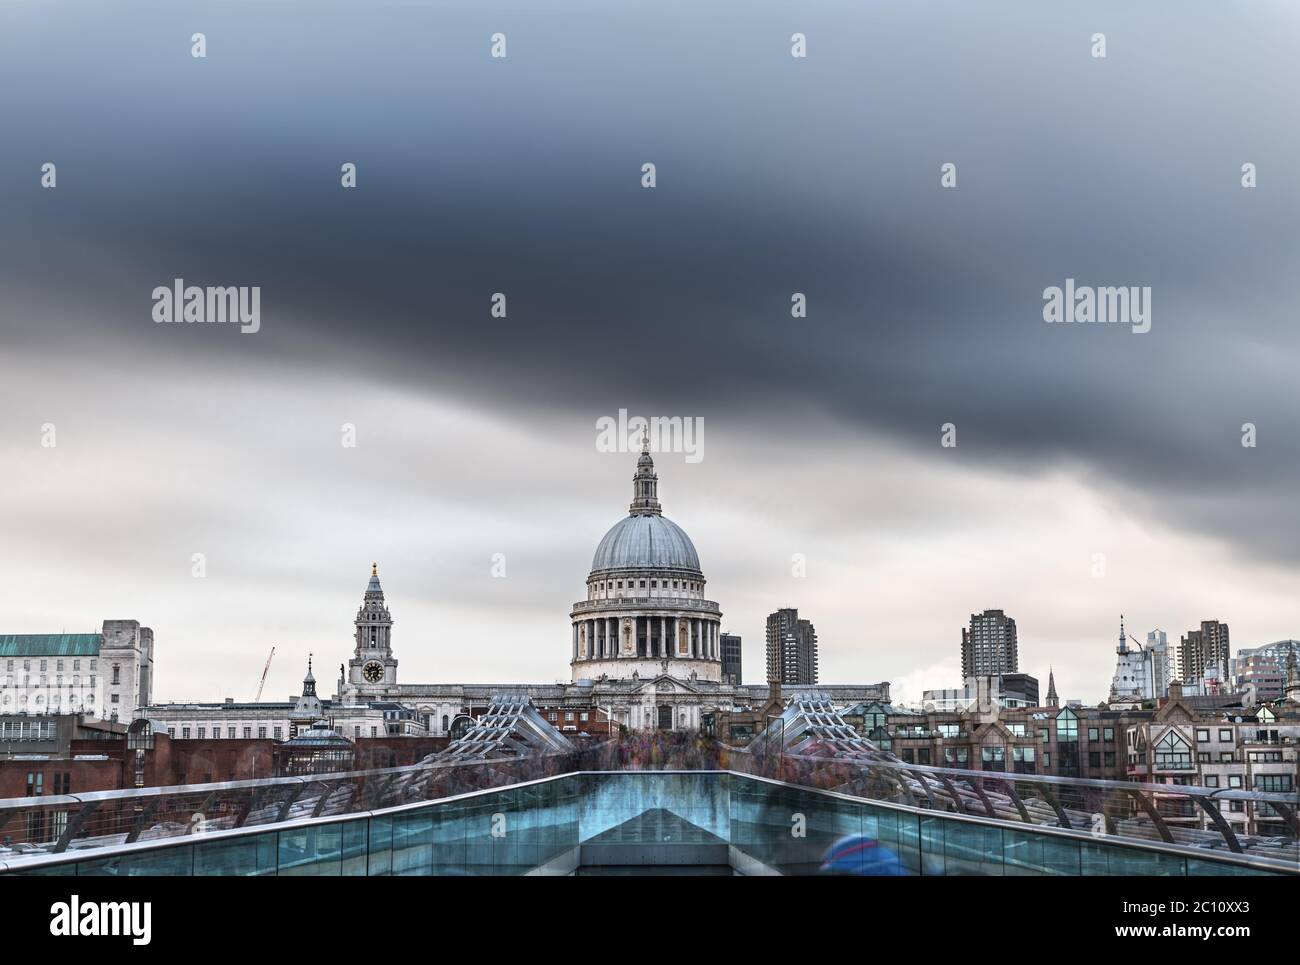 Crowds of locals and tourists cross the river Thames in London over a footbridge, with the dome of St. Paul’s Cathedral under menacing rain clouds. Lo Stock Photo